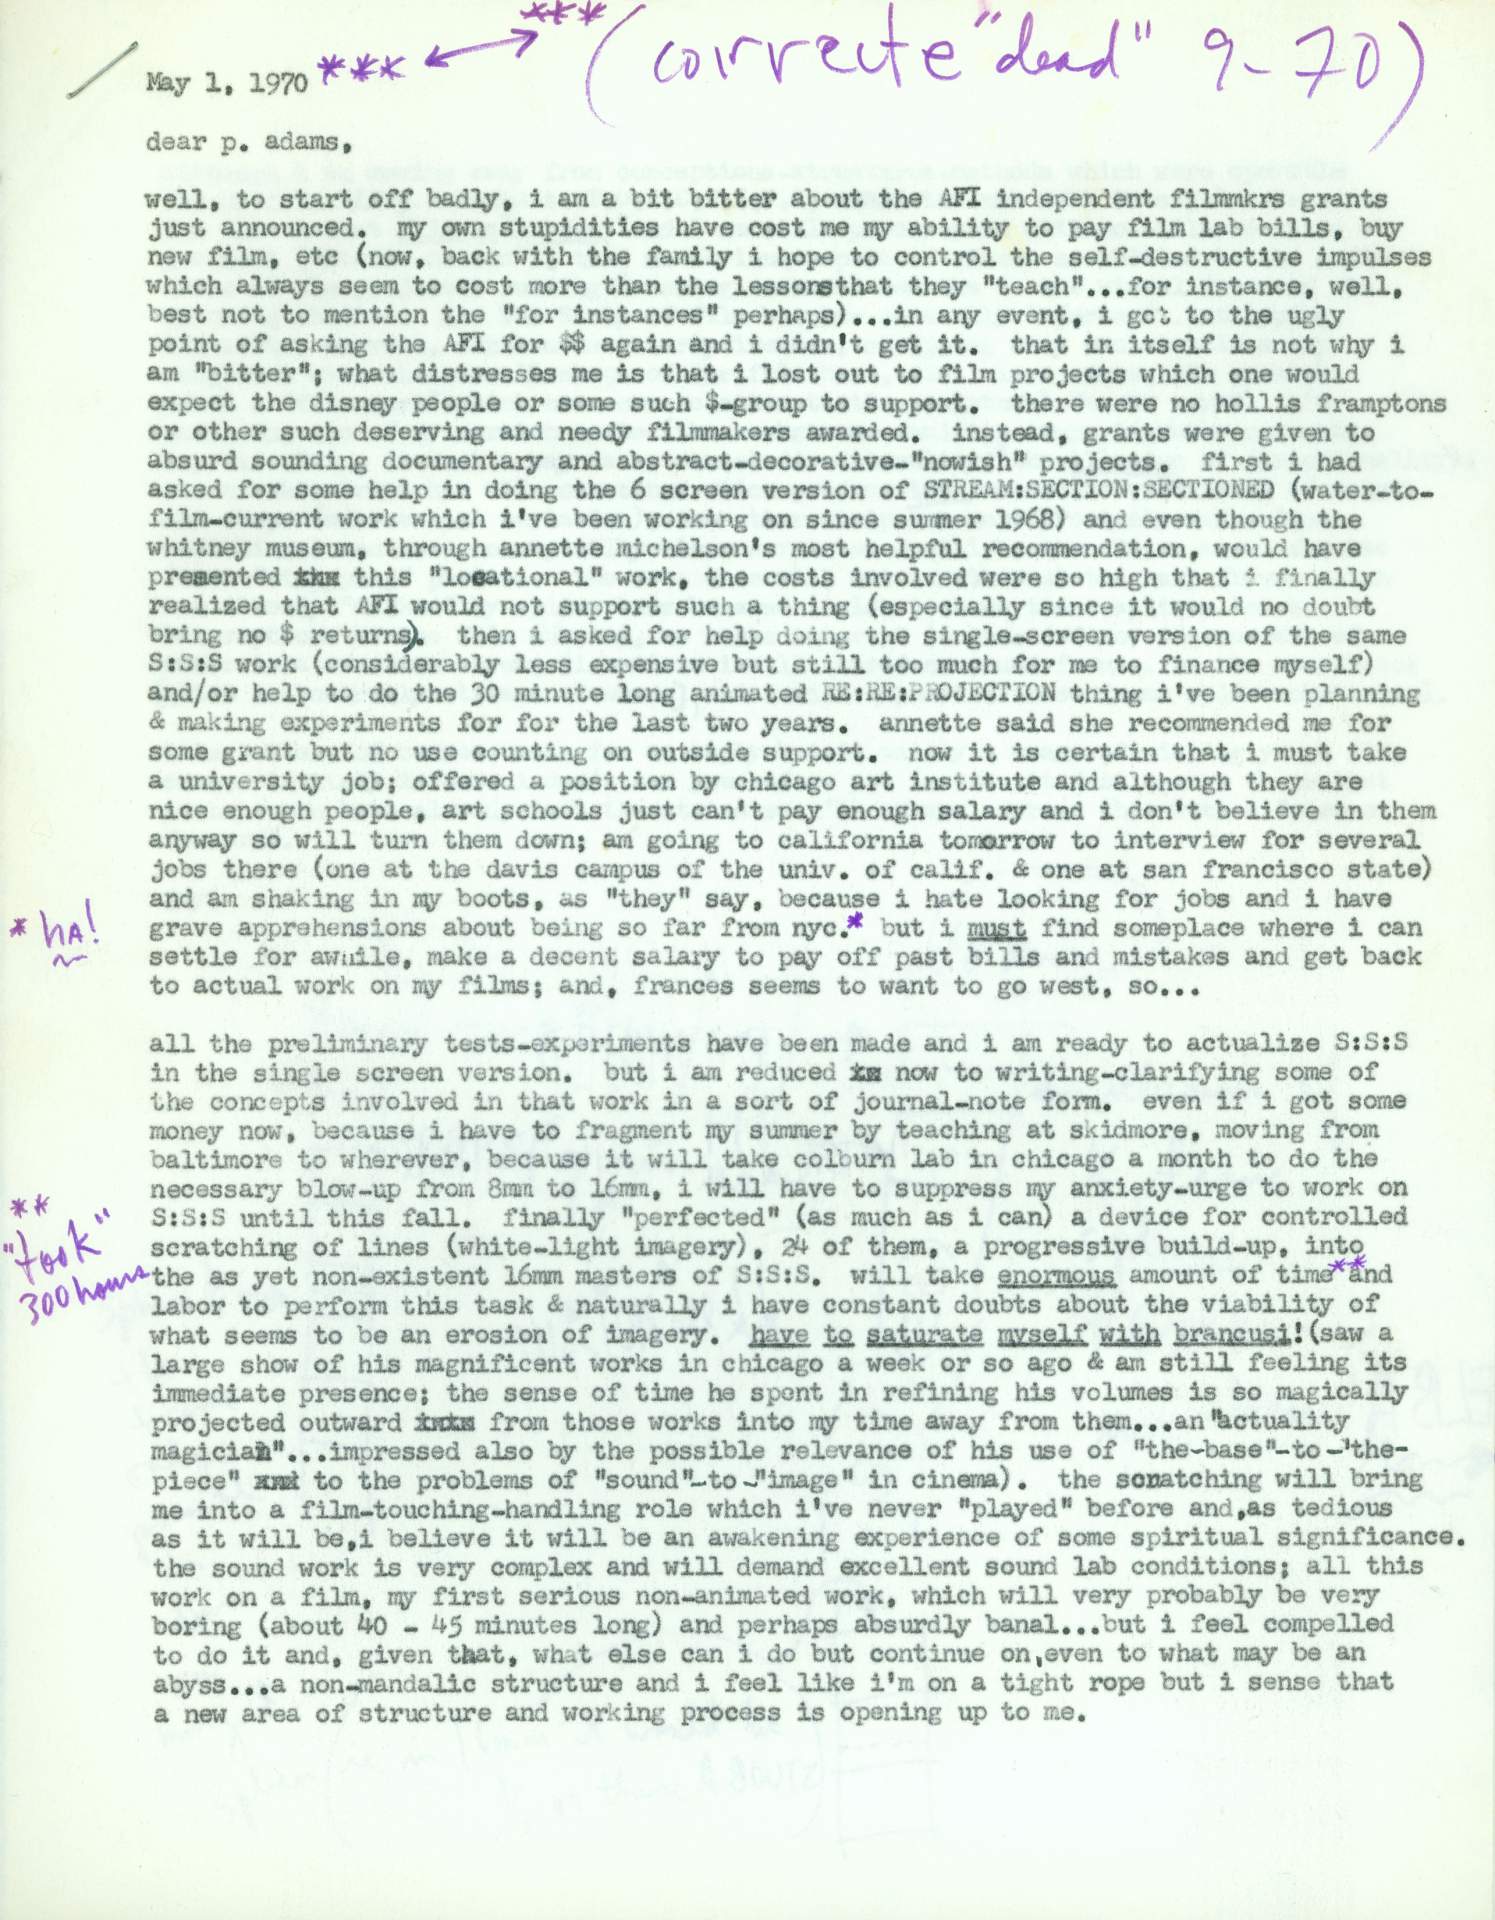 Untitled (pg 1, photocopied typed letter to "p.adams" with handwritten notes)